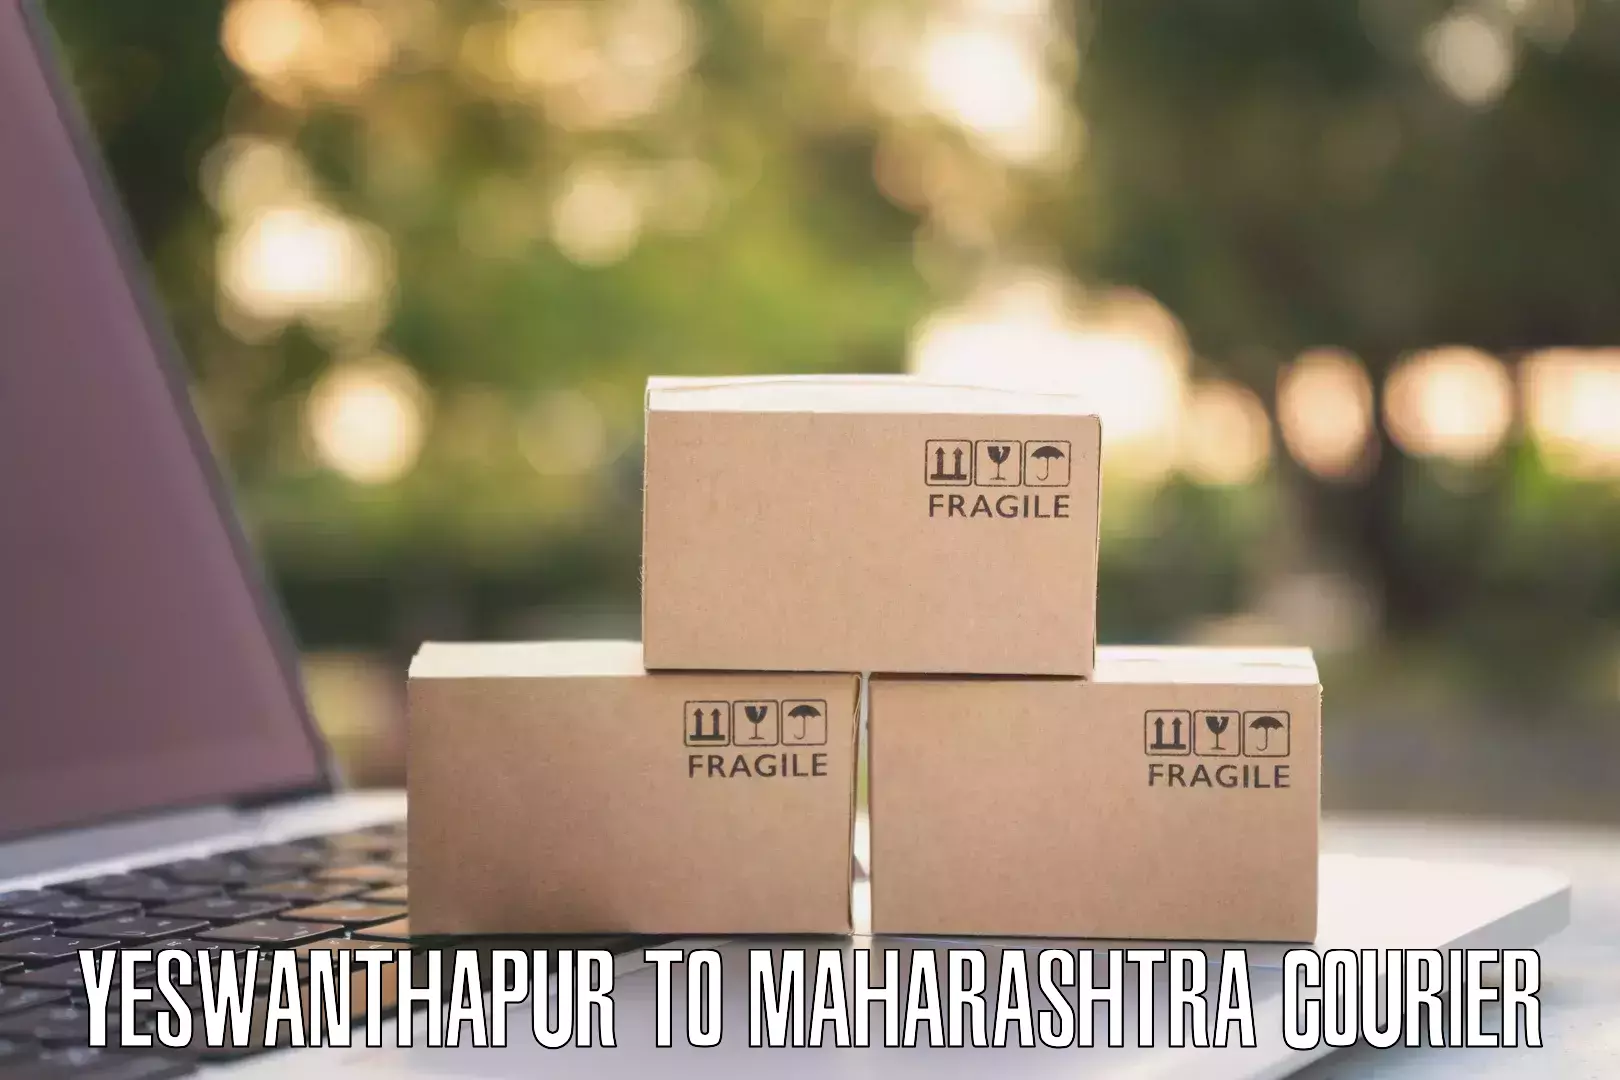 Quick booking process Yeswanthapur to Maharashtra